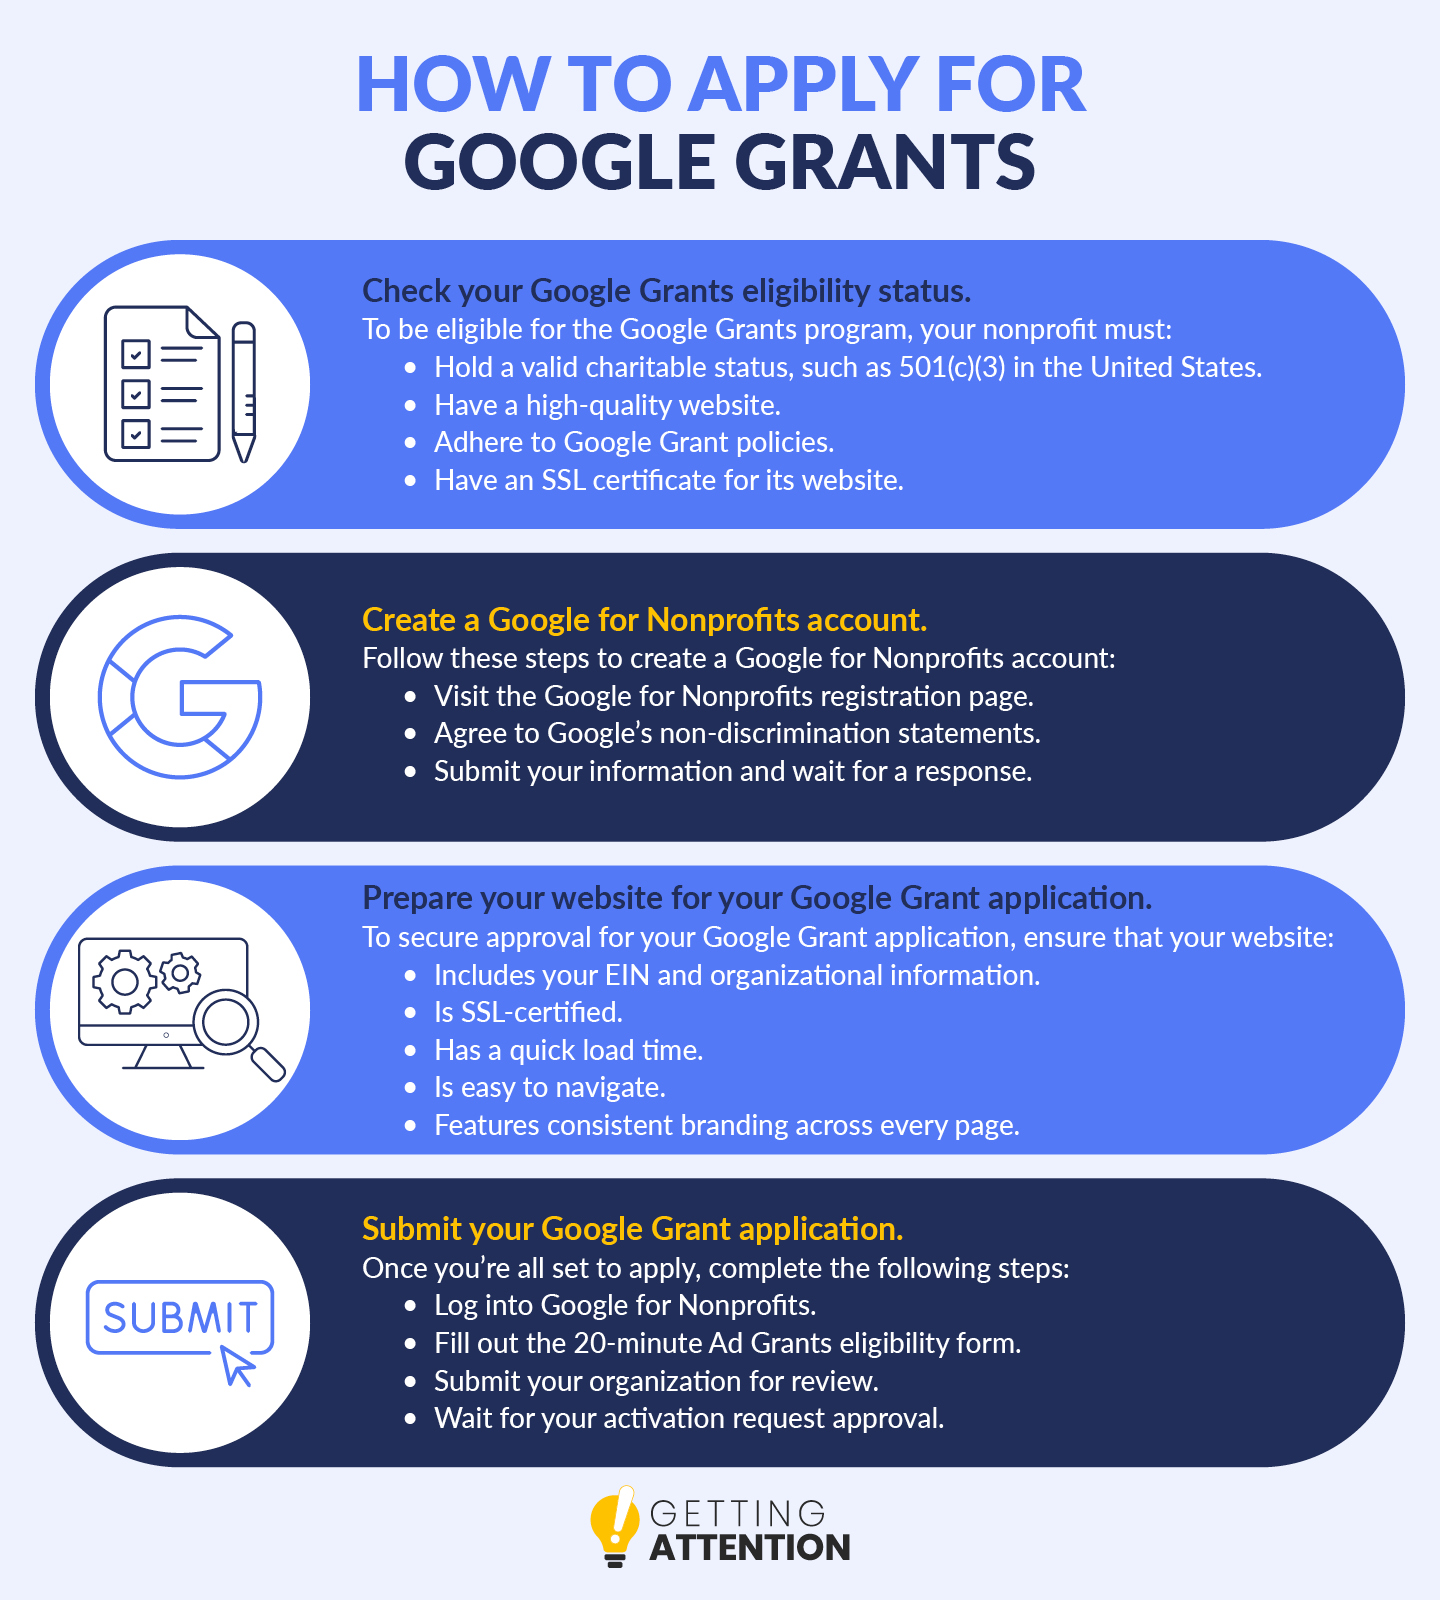 These five steps walk through how to apply for Google Grants and get approved for the program, discussed in detail below.